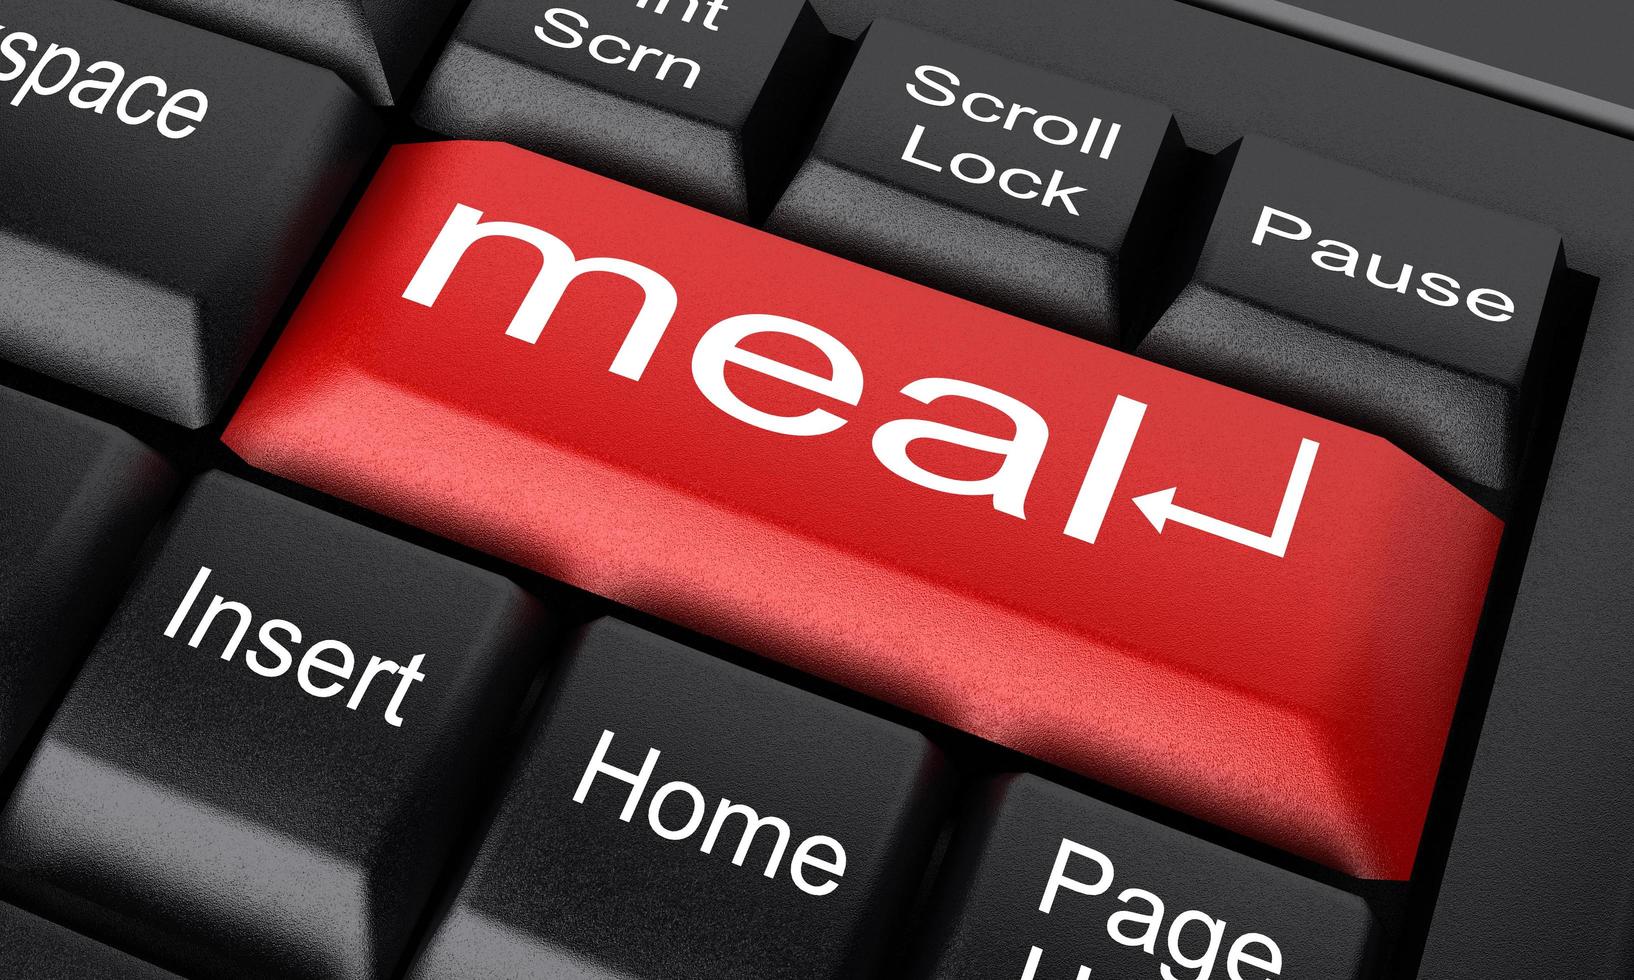 meal word on red keyboard button photo